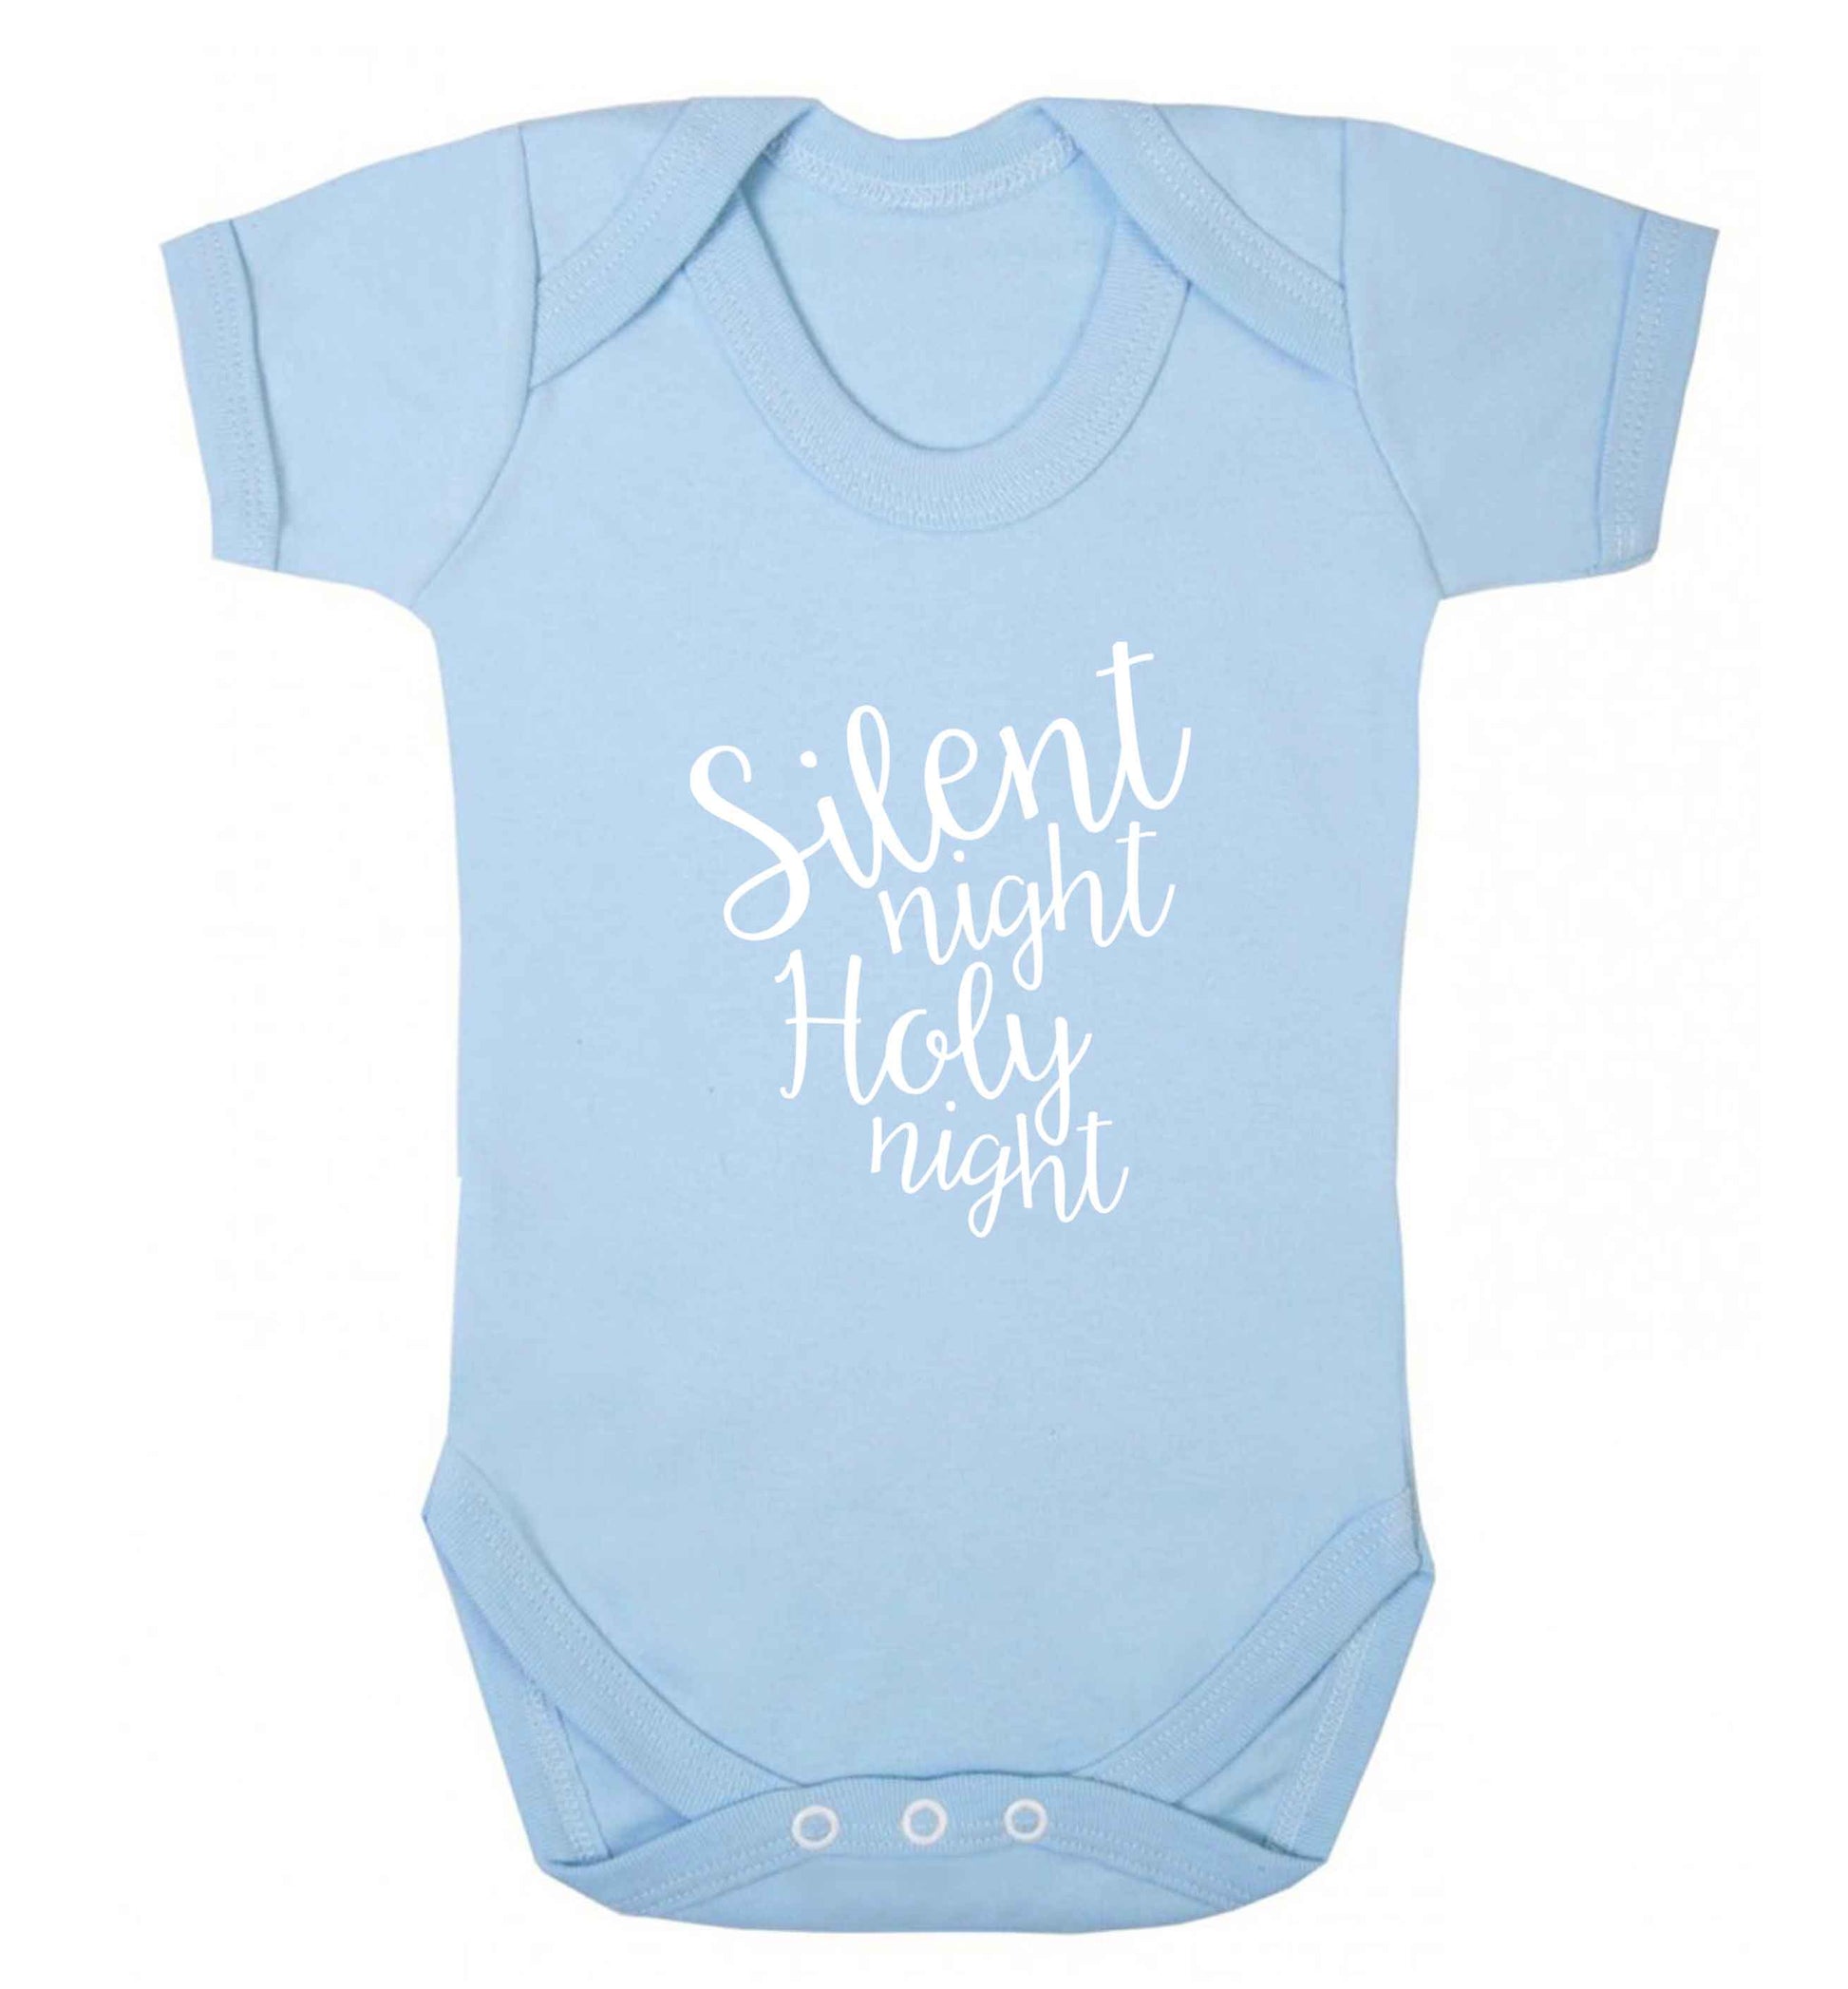 Silent night holy night baby vest pale blue 18-24 months